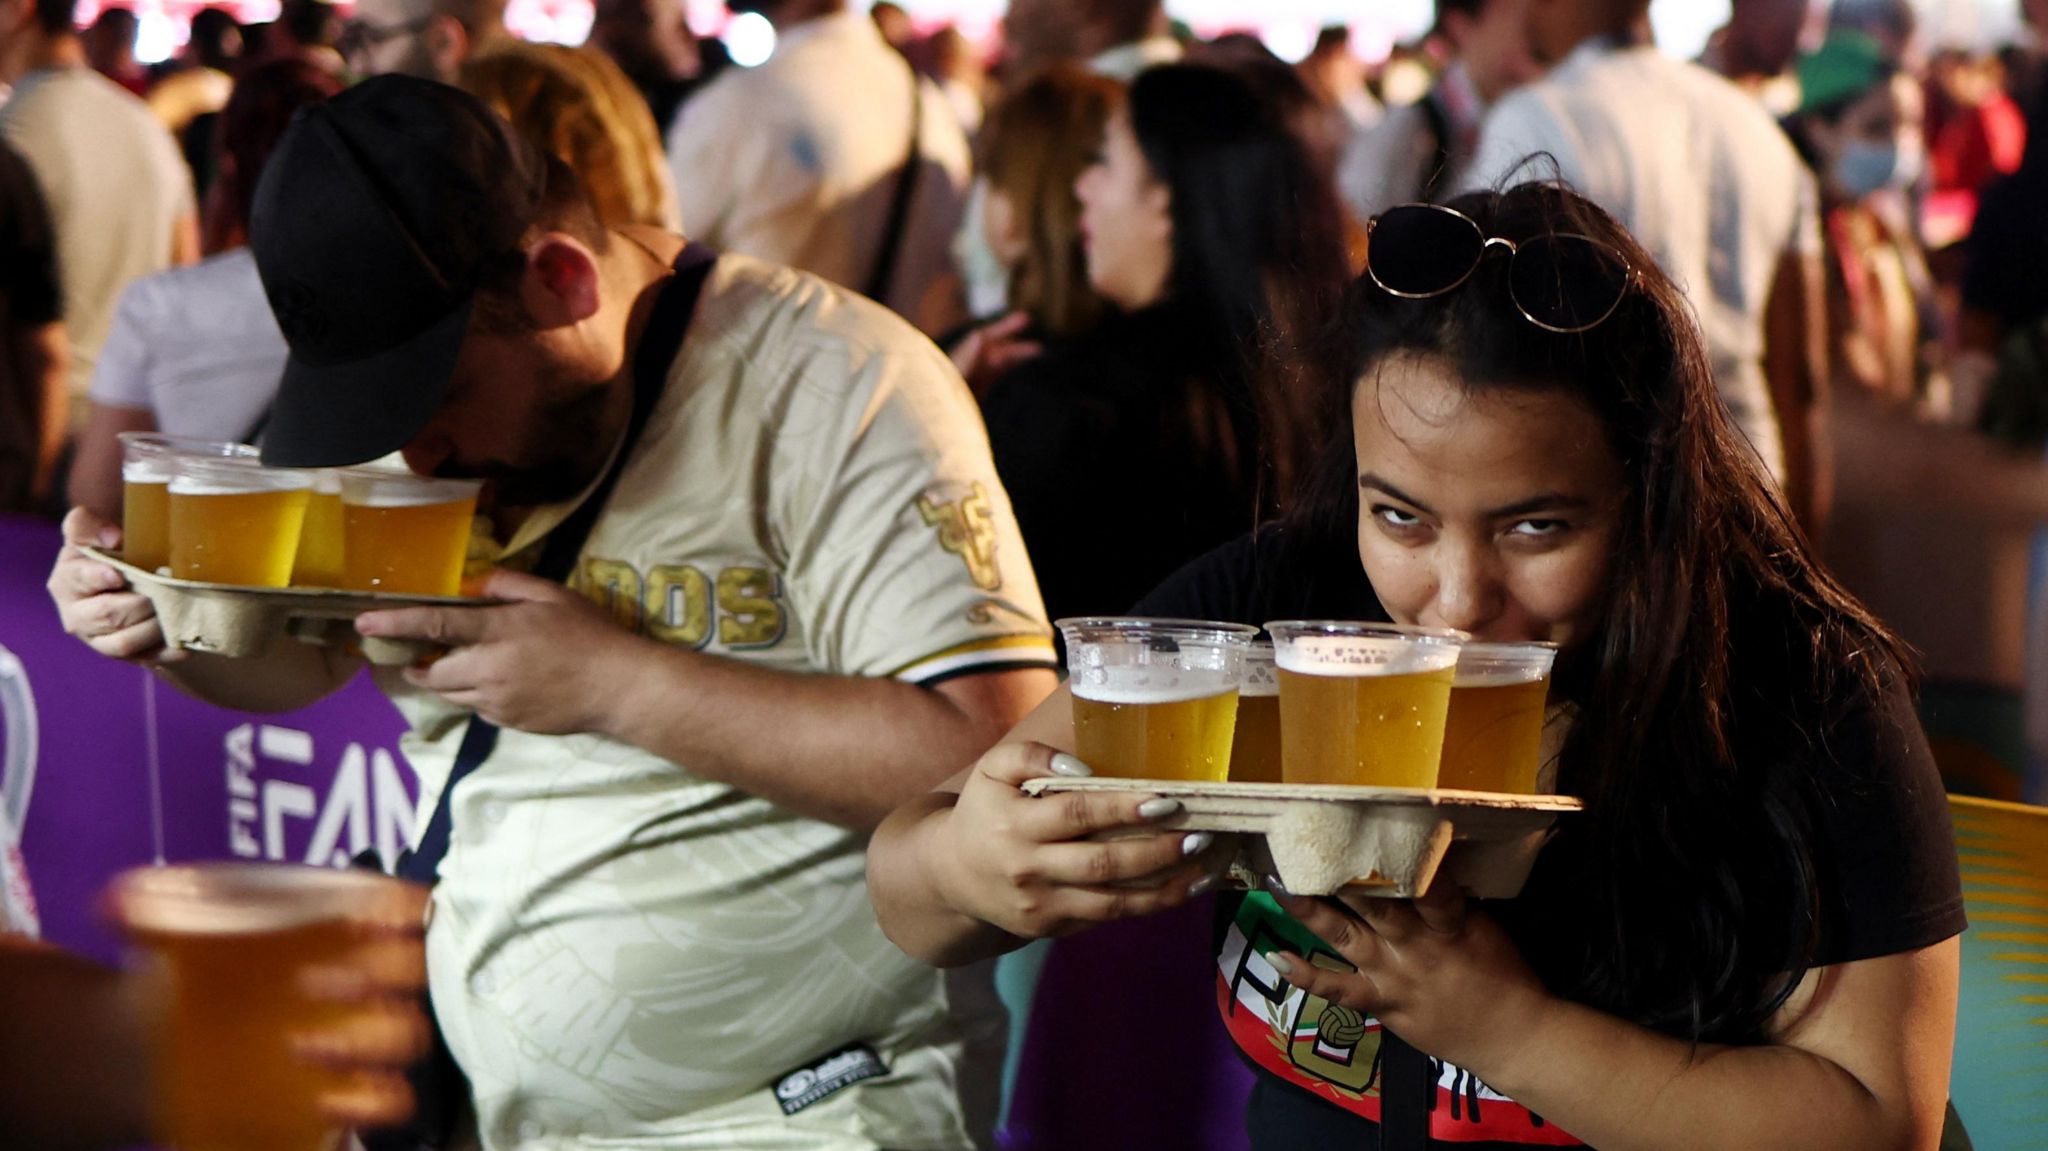 A woman holding four plastic cups of beer and sipping from one